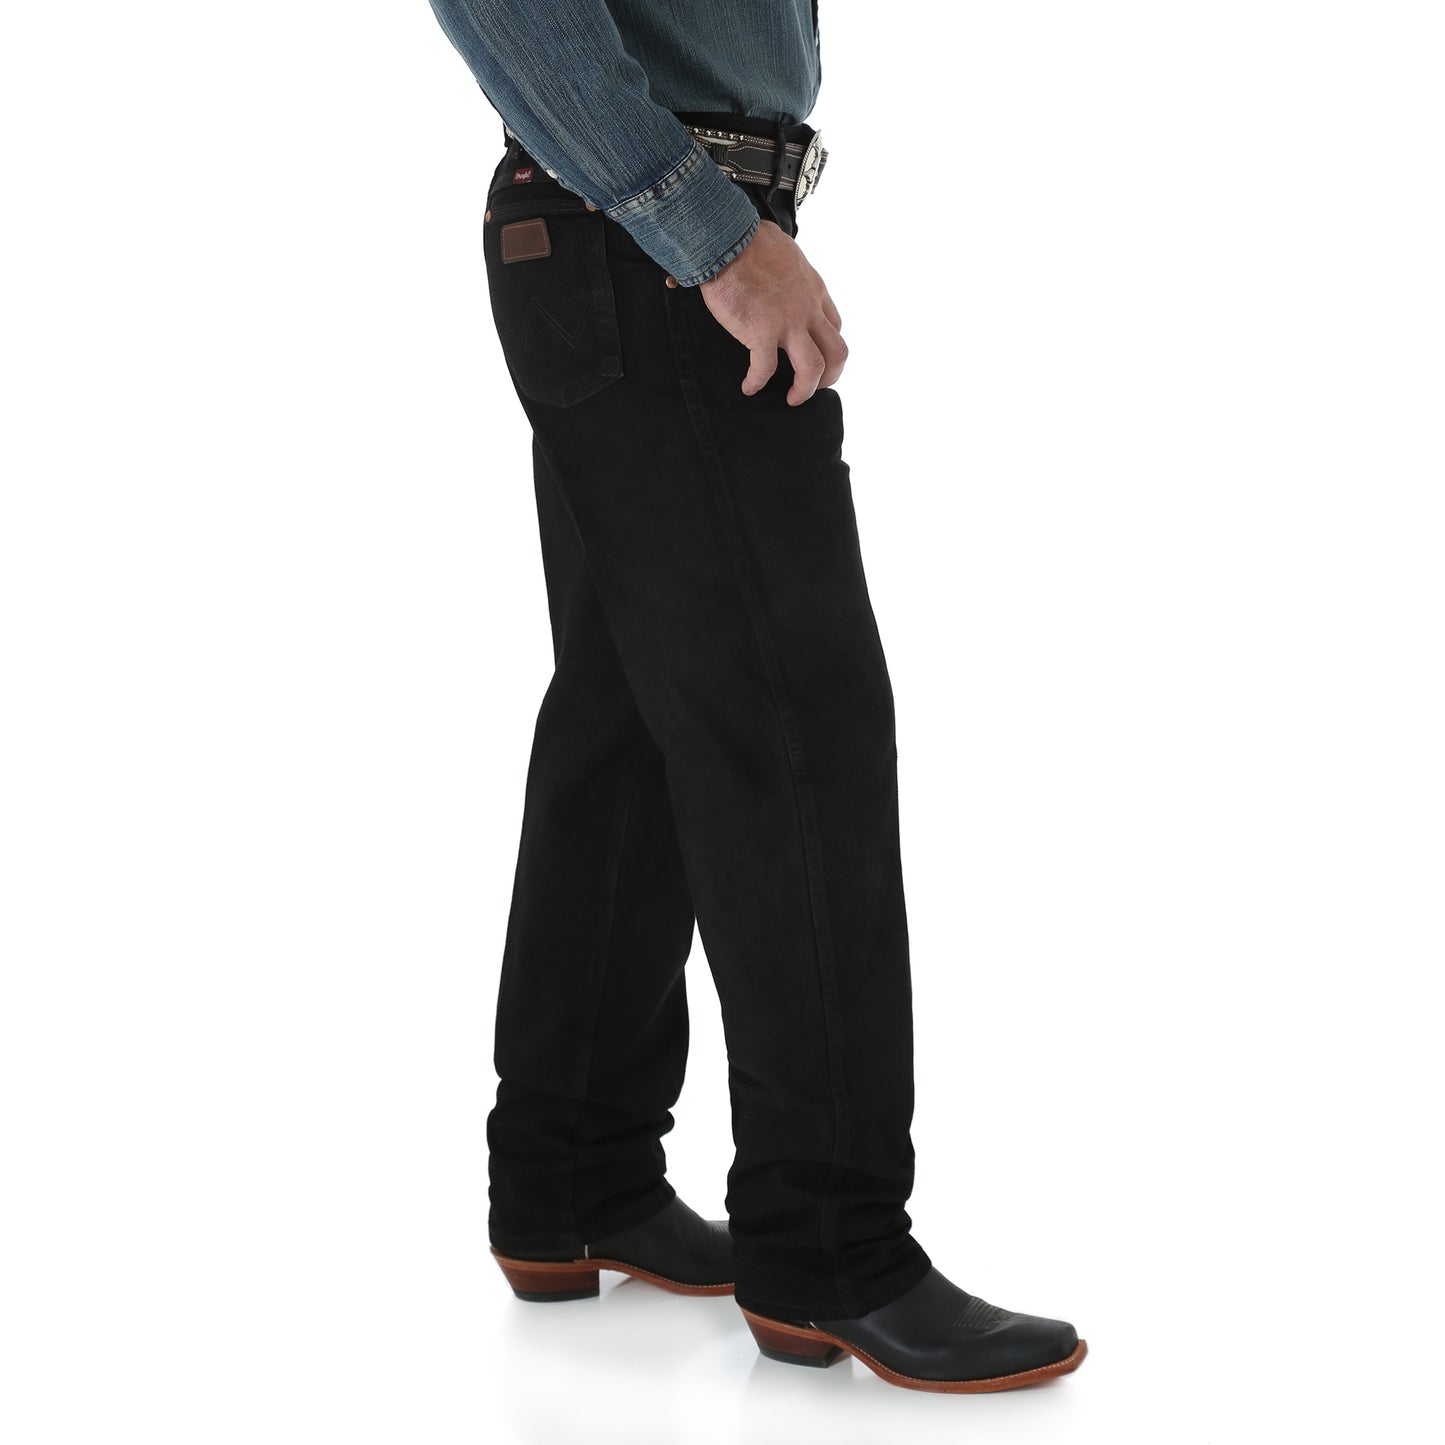 Men's Cowboy Cut® Relaxed Fit Jeans Shadow Black